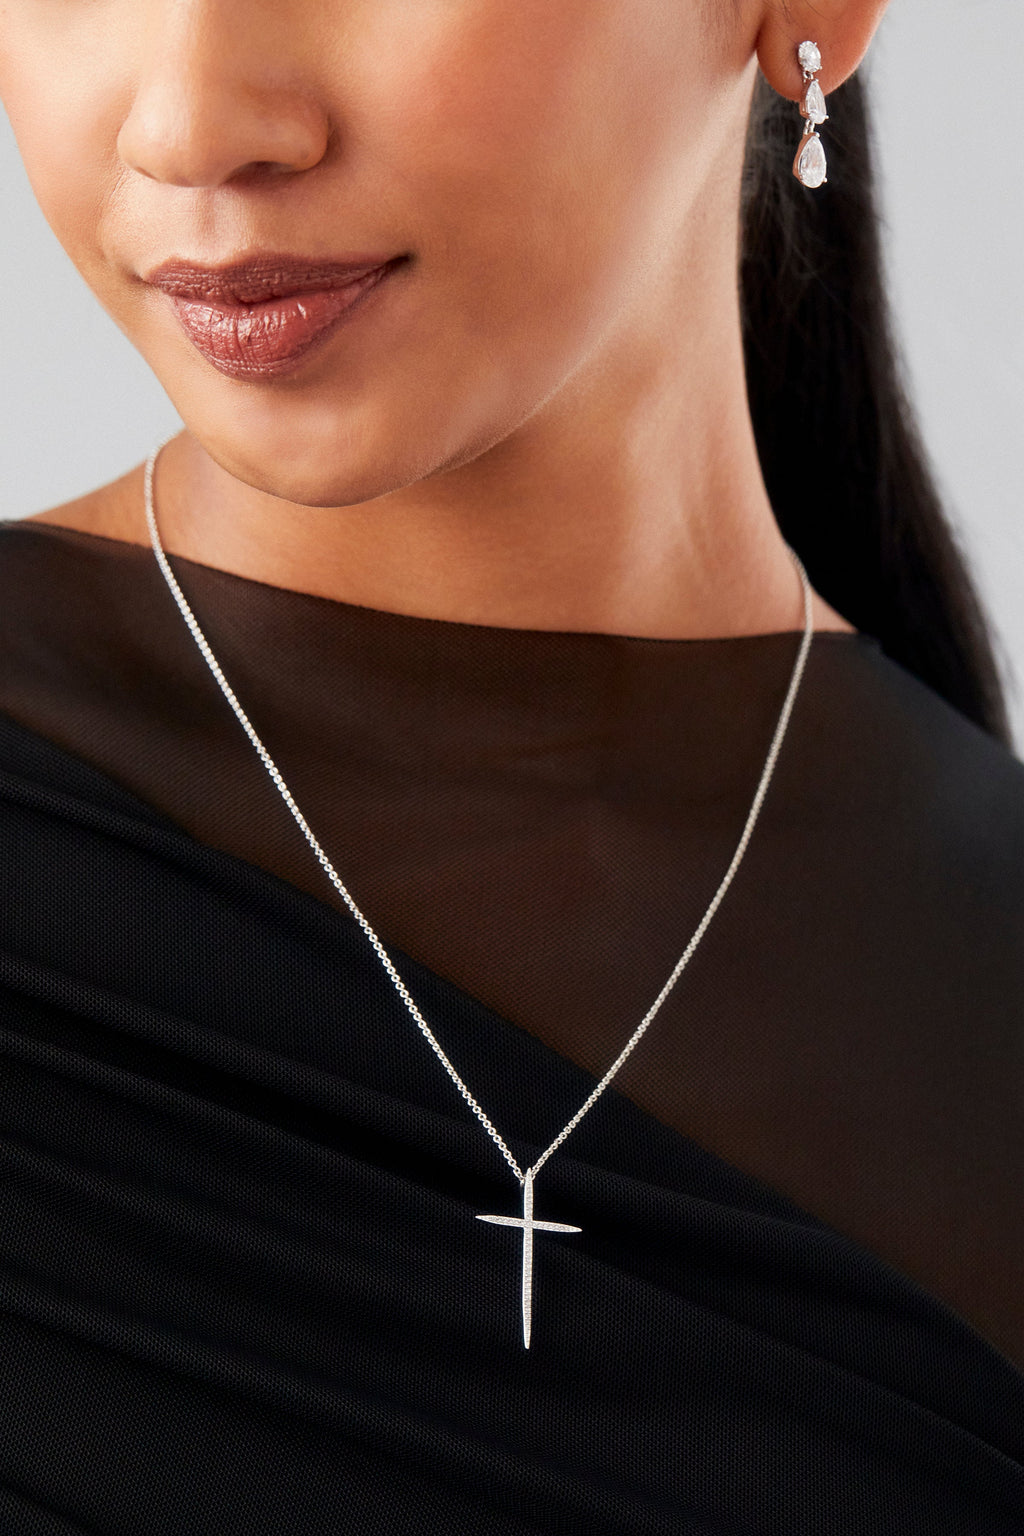 IN THE AIR PAVE CZ CROSS PENDANT NECKLACE